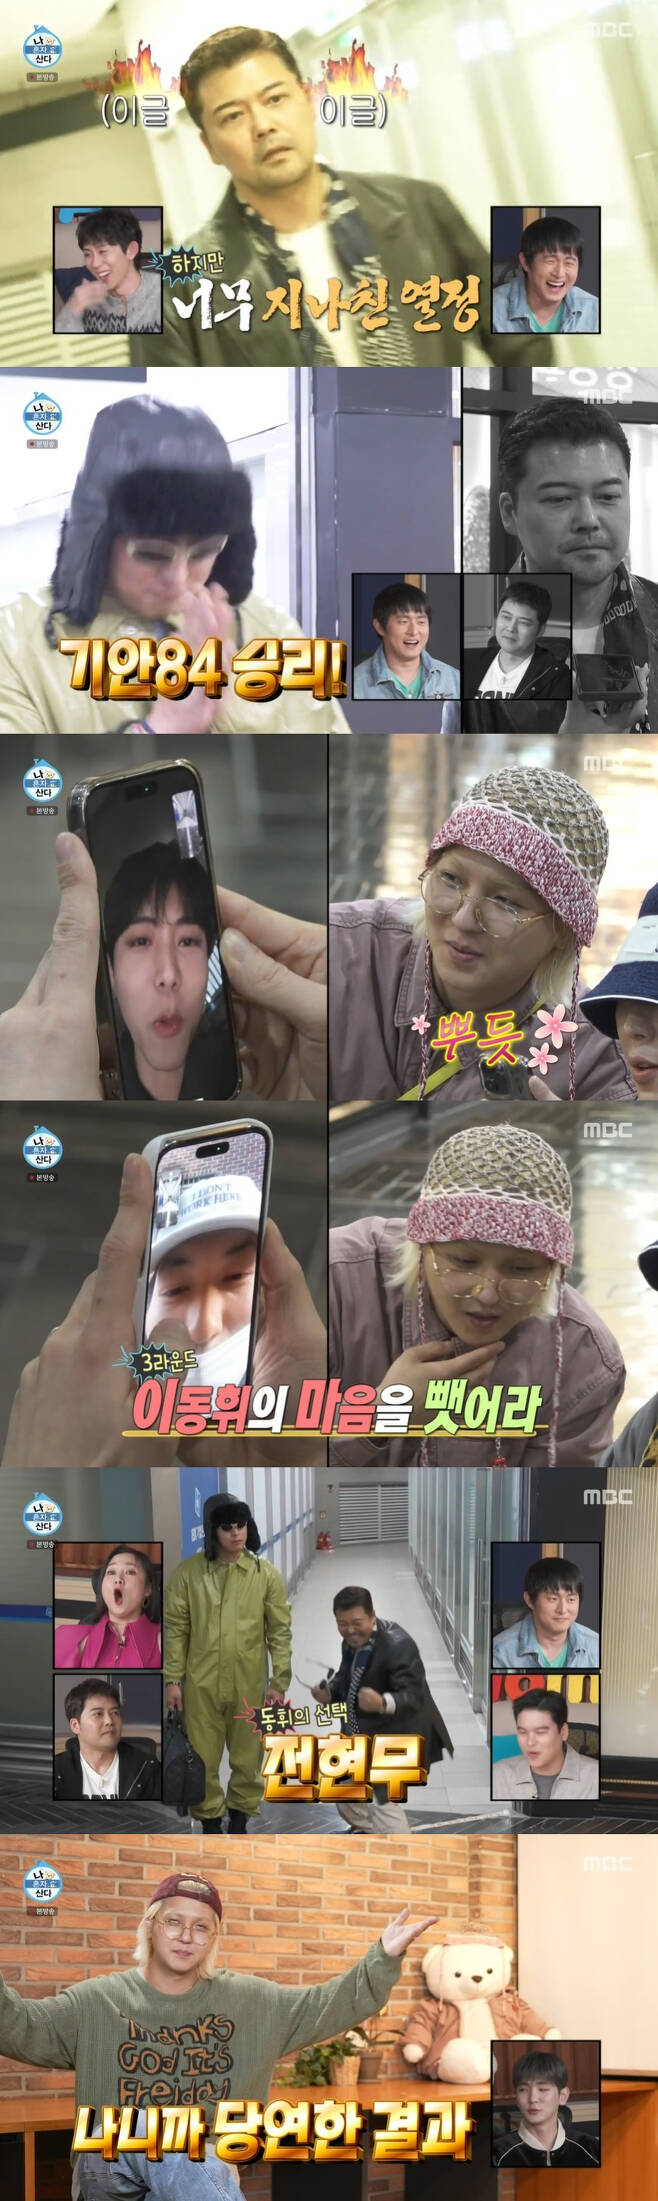 MBC entertainment program I Live Alone broadcasted on the afternoon of the 14th showed Jun Hyun-moo, Code Kunst, Kian84 and Song Min-ho playing Fashion.On this day, Jun Hyun-moo and Kod Kunst scoffed at Kian84s style, with Kod Kunst saying, Whats that, while Song Min-ho and Kian84 told Jun Hyun-moos Fashion, Whats Leon?That guy, he laughed.Jun Hyun-moo pointed out Kian84s style in an interview with the production team. Jun Hyun-moo said, Hes trying to be funny. Minho did not mean much. I thought it was just an alien walking.Something Kian84 was covered in (Song Min-ho)s clothes. He was eaten by his clothes, Kod Kunst said.Song Min-ho also laughed at Fashion in an interview with the production team, saying, As soon as I saw it, I thought I was joking. I was dressed up in a leather jacket. I thought I had a concept that was funny.Kian84 also shrugged, saying, Two-thirds were jackets. I was too wobbly.The second judge, Joo Woo-jae, chose Kian84, and Jun Hyun-moo said, Lets call Yi Dong-hwi once and I will admit it neatly.Yi Dong-hwi said to the two people walking, Its a wrap, and said, Im your brother.In an interview with the production team, Jun Hyun-moo said, I didnt want to miss out on Yi Dong-hwi. If Yi Dong-hwi only acknowledges me, I can win the spirit. Yi Dong-hwi is very nice.Zico said, I think Kian84 has won. Hyun-moo feels a little Hong Kong.This resulted in Jun Hyun-moo losing the match to Fashion by a score of three to one.The winner, Song Min-ho, said, Its my first model. Its a great mannequin. It feels so good to end up winning. Kian84 said, I actually felt a little bad for my brother. I think I hurt my brother by asking him to do something that he shouldnt have done.I think I can wear it well if I try harder. The next time I have time, lets go shopping together. Ill pick clothes.Jun Hyun-moo wrote evil, and Code Kunst said shameful and brought Laughter.